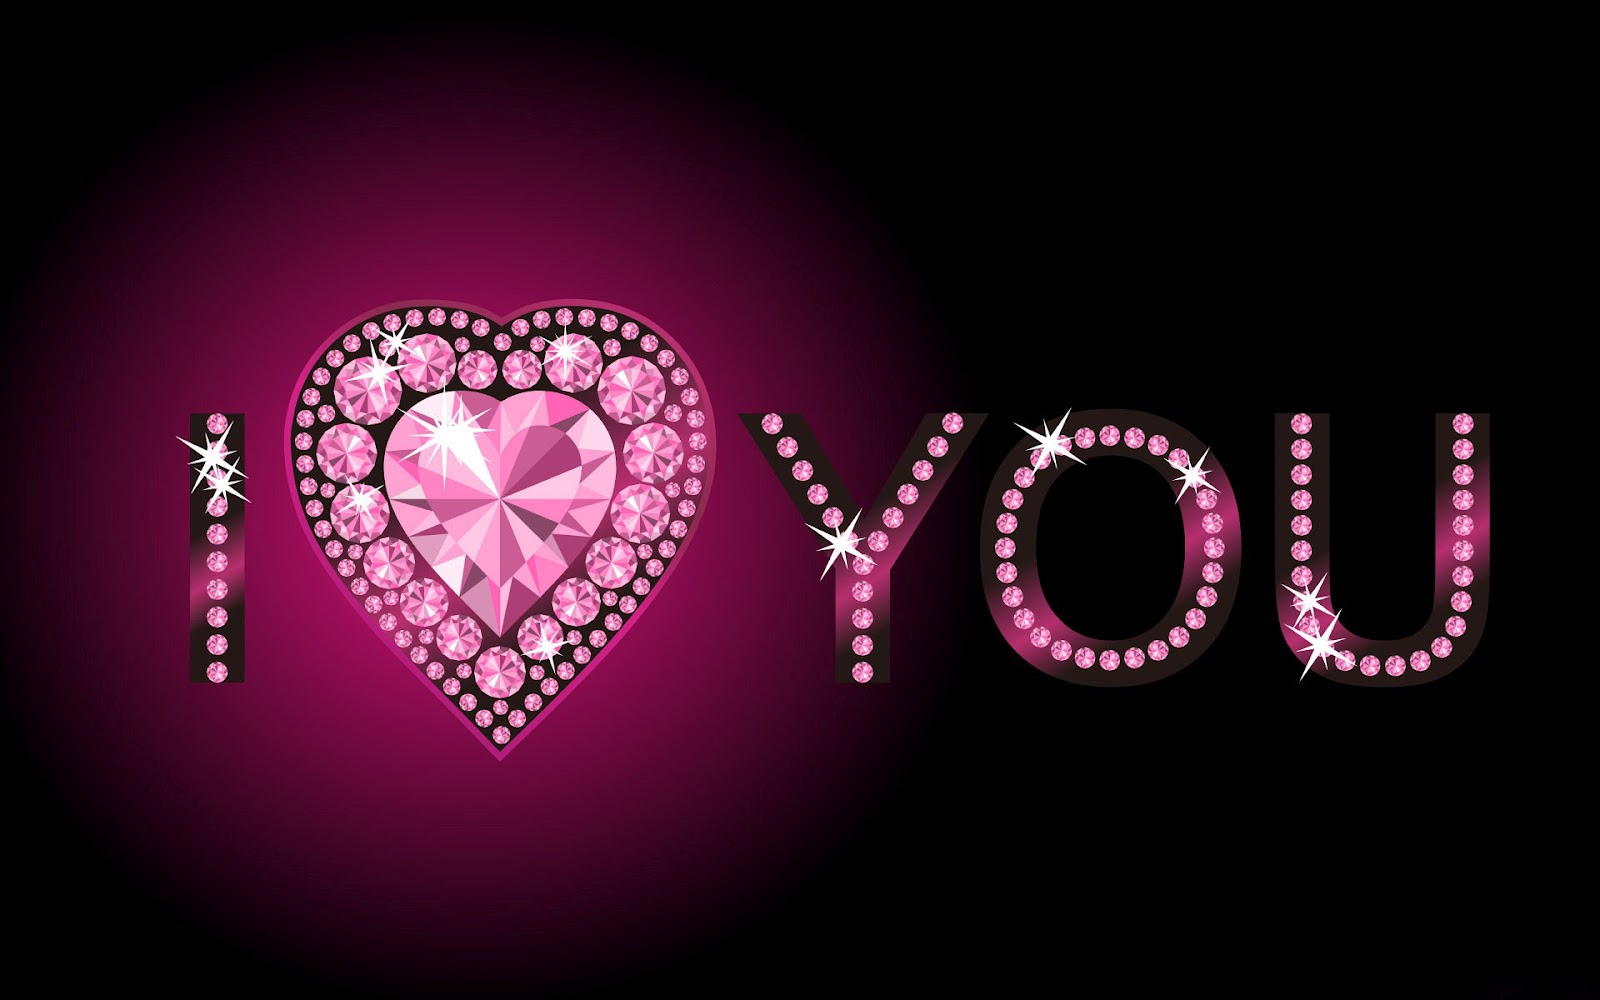 This Is For My Sweet Jaan Myau Dear I Love U So Much